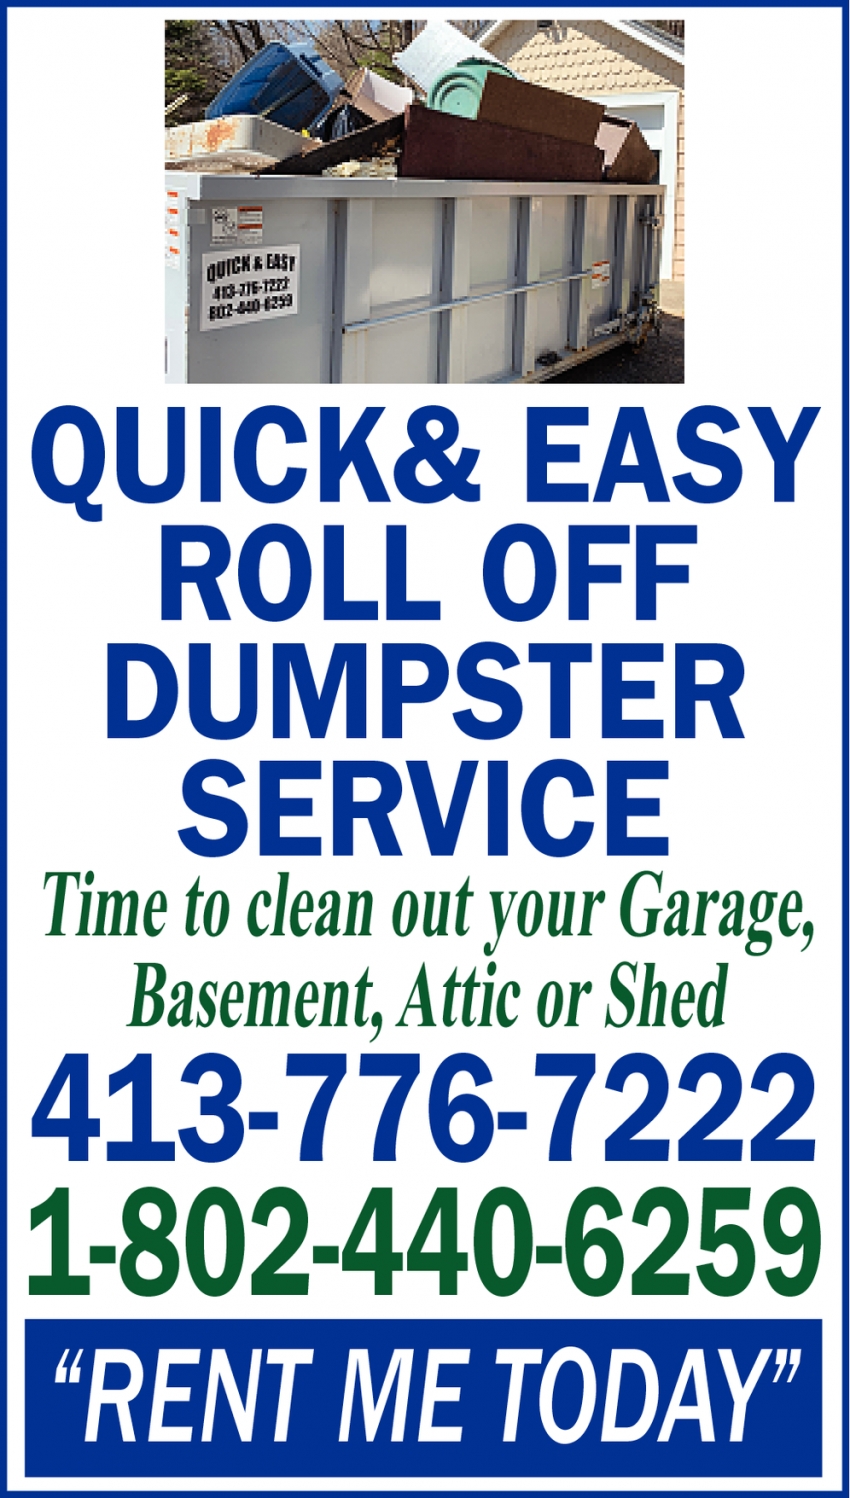 Quick & Easy Roll OFF Dumpster Service